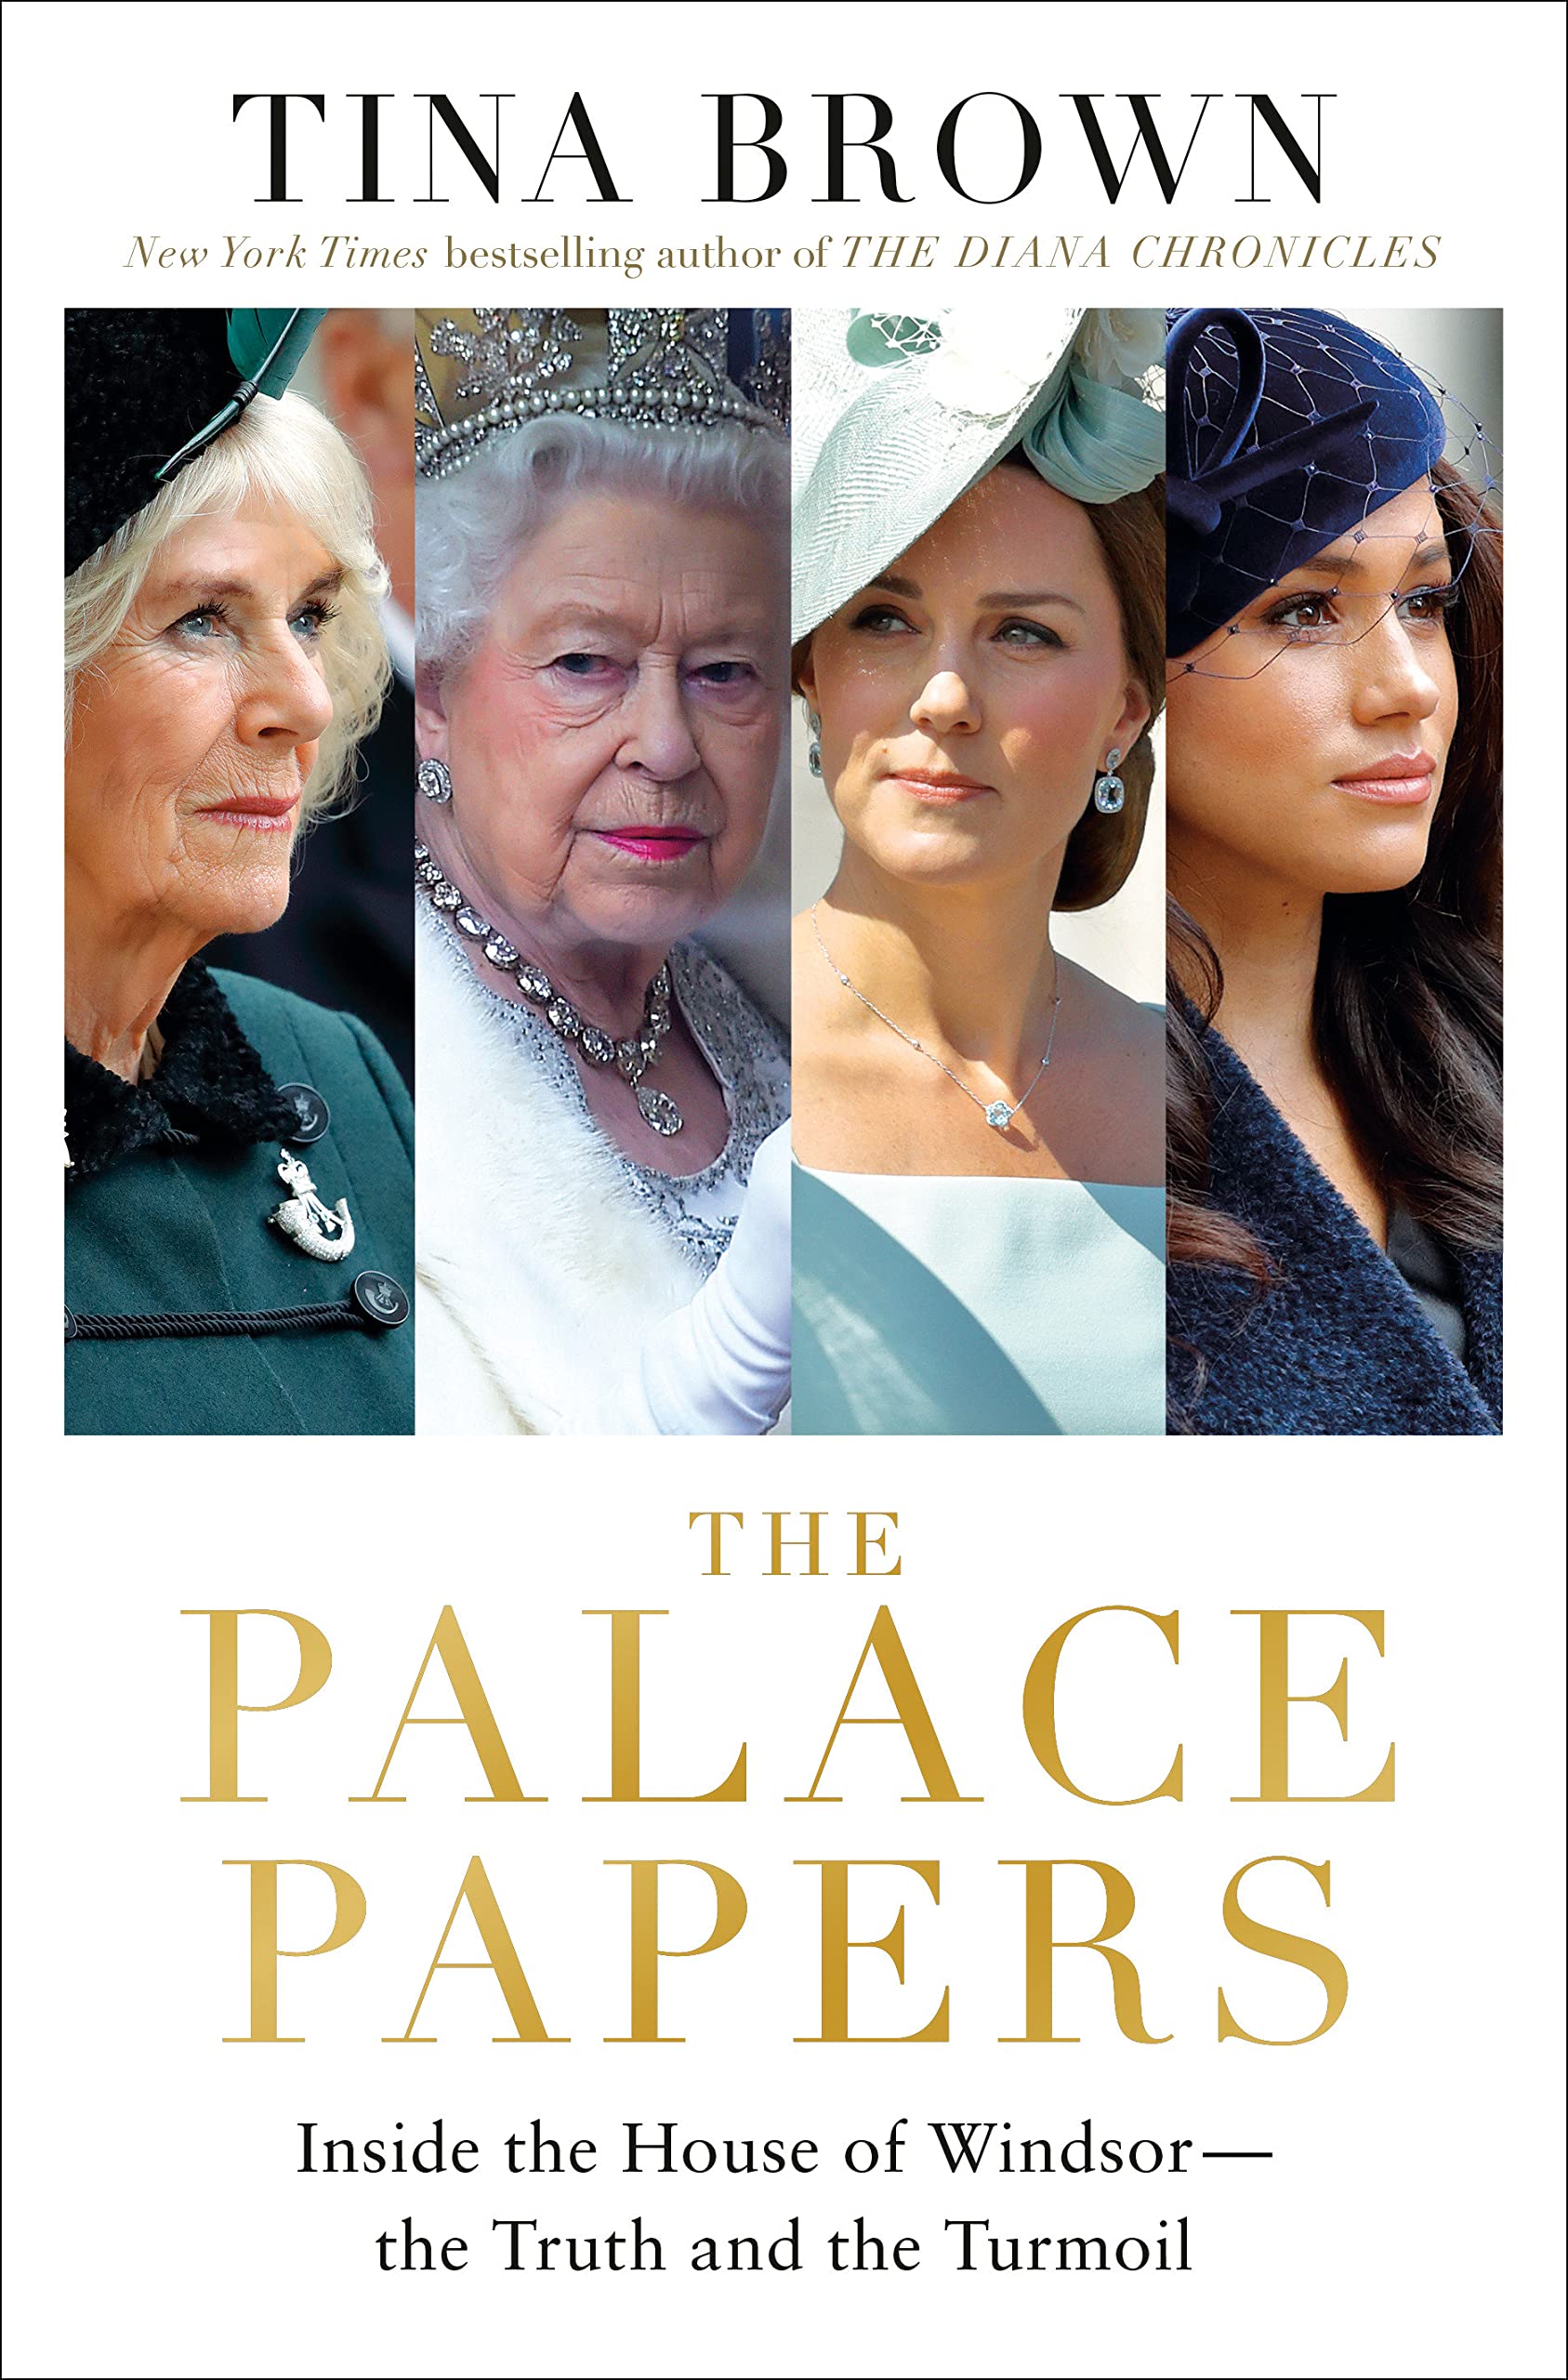 Image of the book cover for Palace Papers: Inside the House of Windsor— the Truth and the Turmoil by Tina Brown featuring a collage photo of Queen Elizabeth, Camilla Parker Bowles, Kate Middleton and Meghan Markle. 